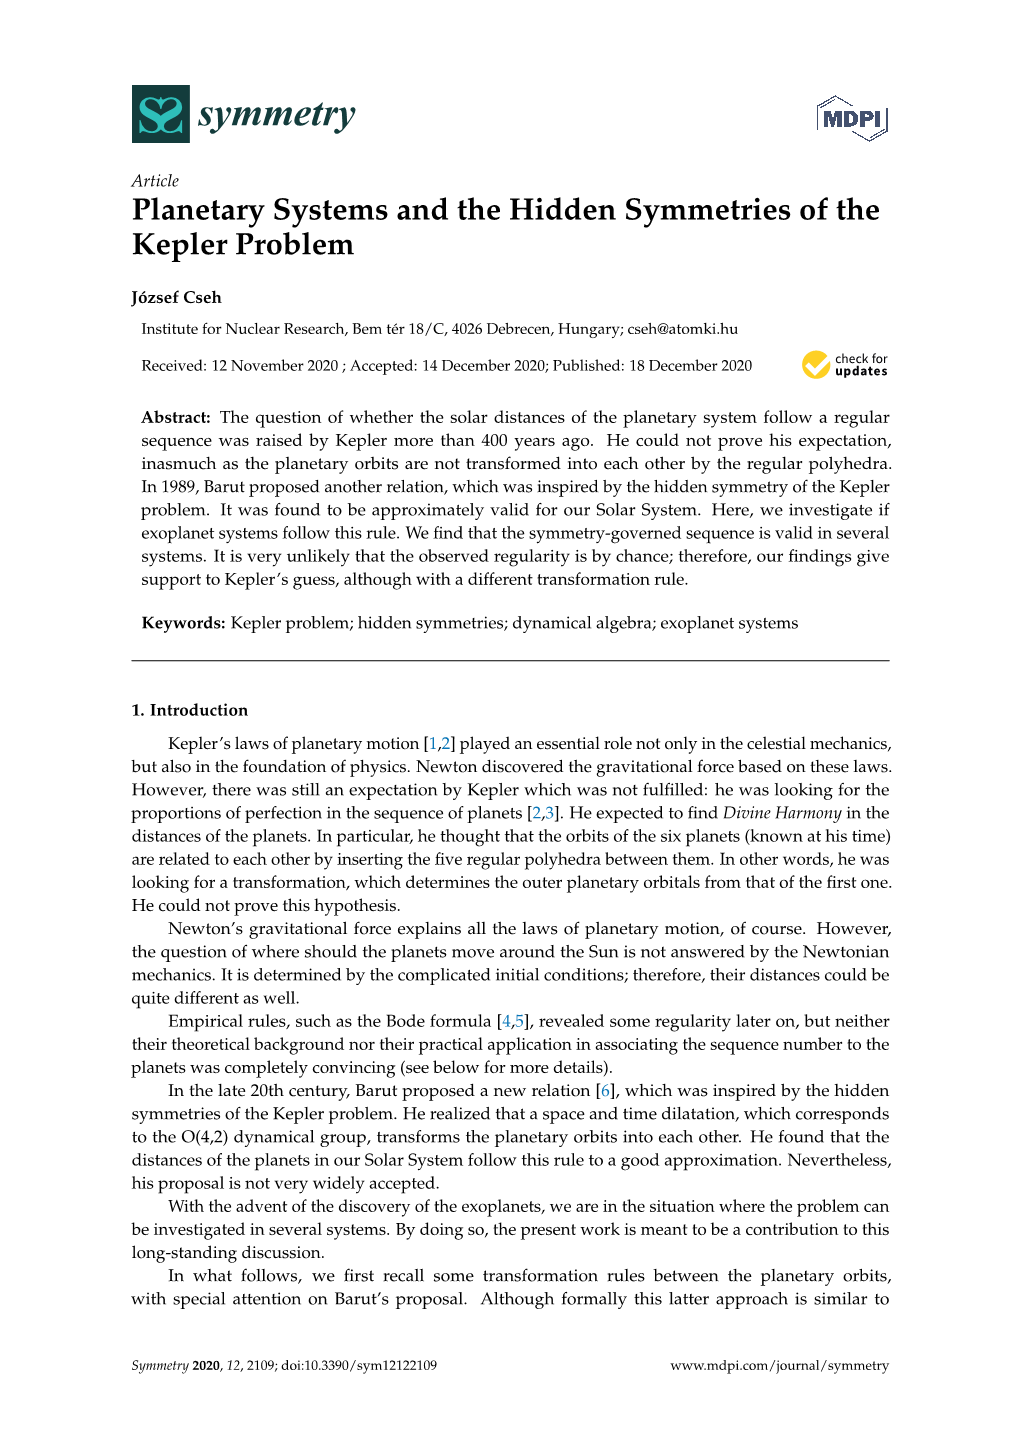 Planetary Systems and the Hidden Symmetries of the Kepler Problem